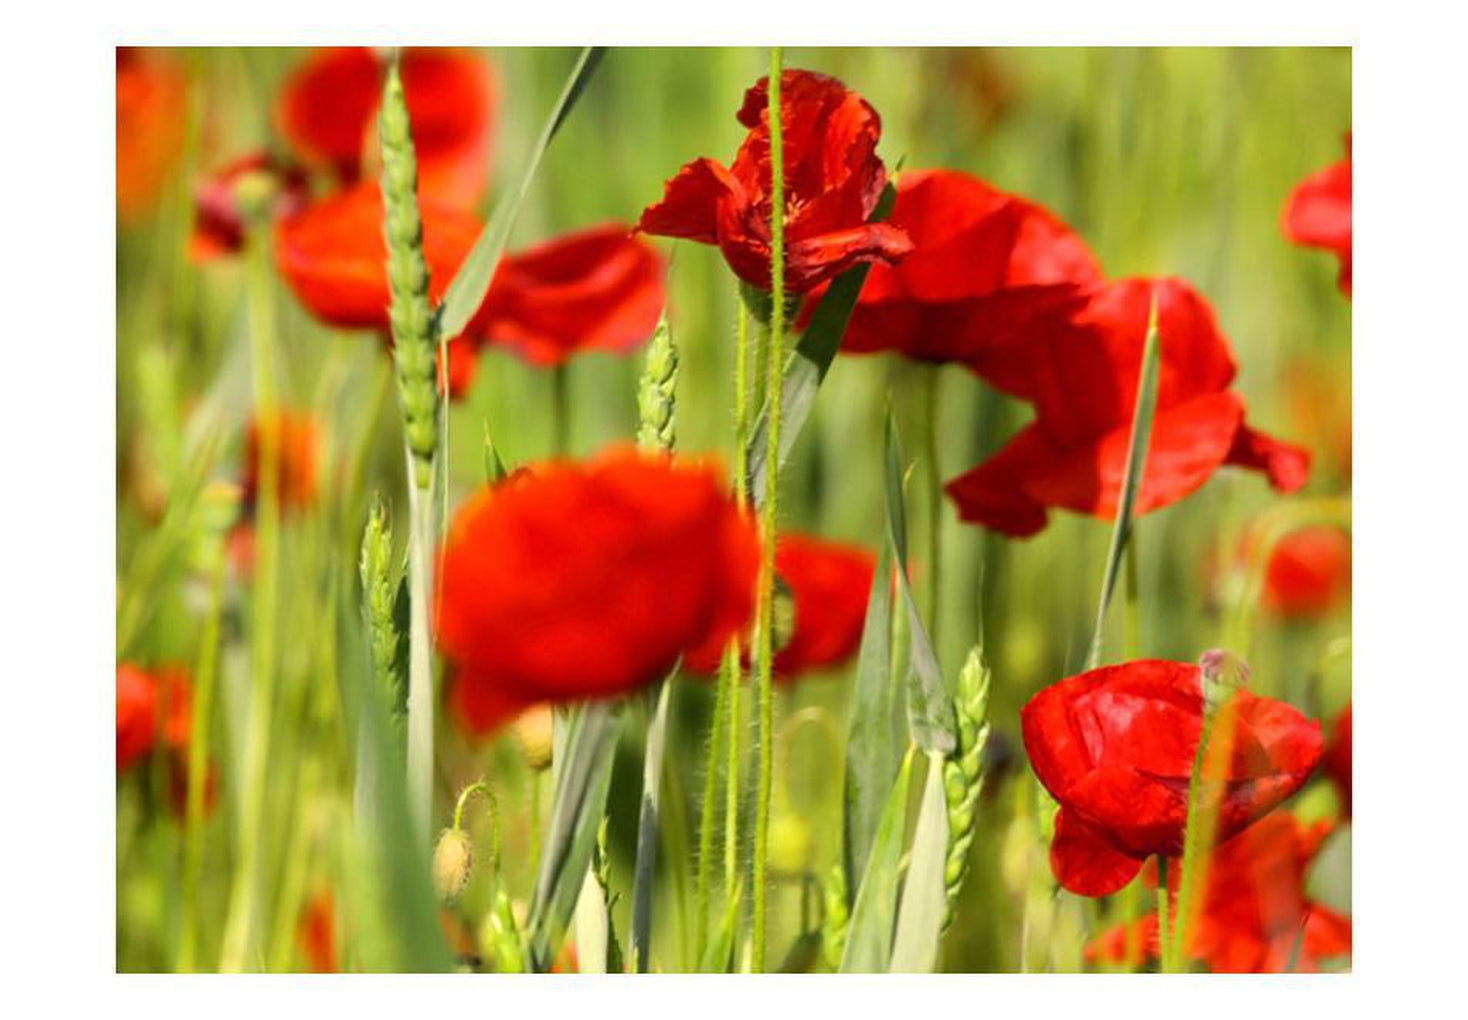 Wall mural - Cereal field with poppies-TipTopHomeDecor